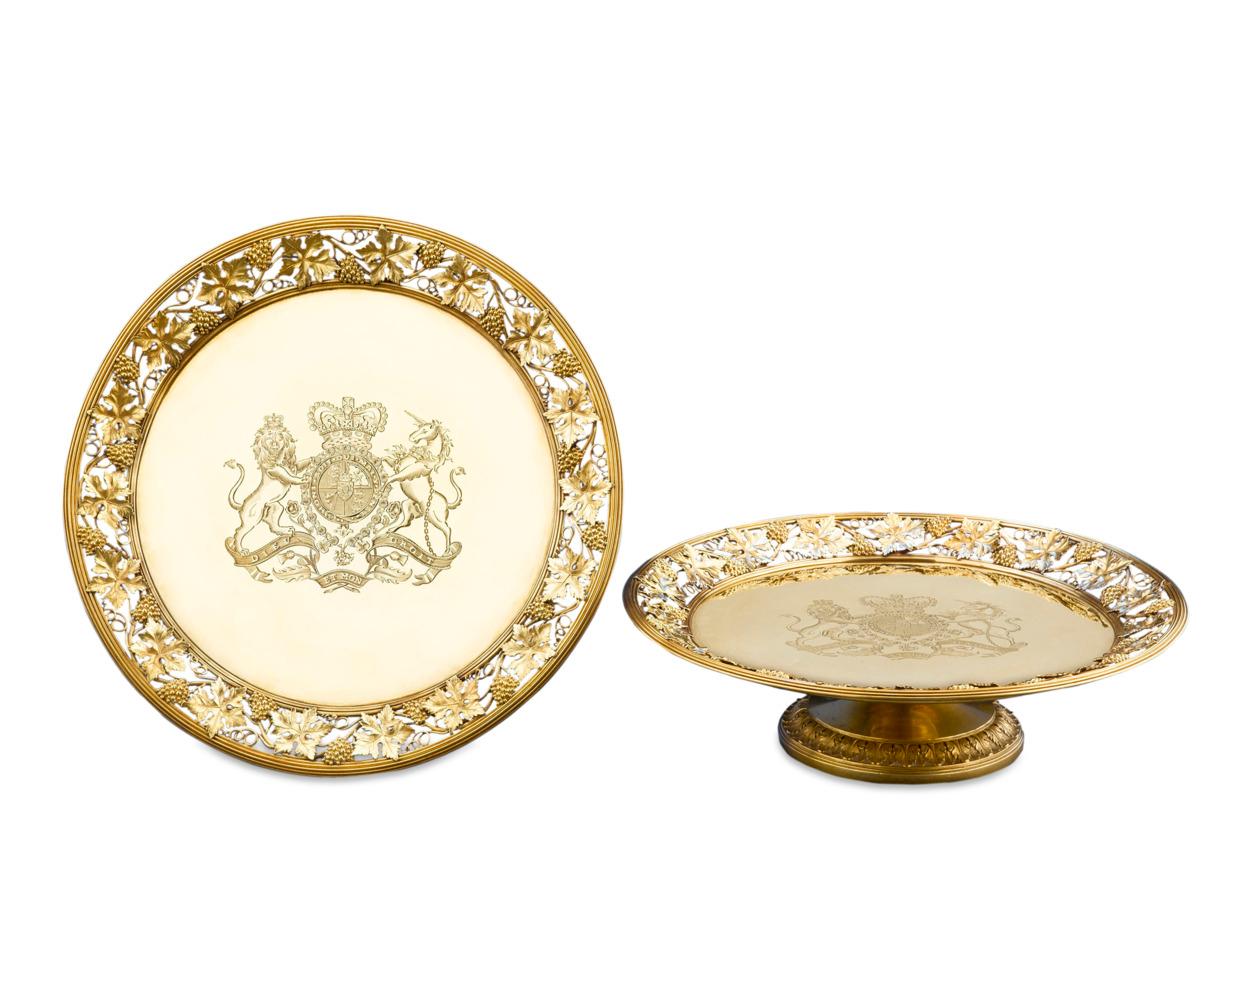 This extraordinary pair of silver gilt tazze was crafted by the famed partnership of Digby Scott and Benjamin Smith. The tazze are exemplary of the superior work produced by Scott and Smith, the most prominent silversmiths of the Georgian era. Each